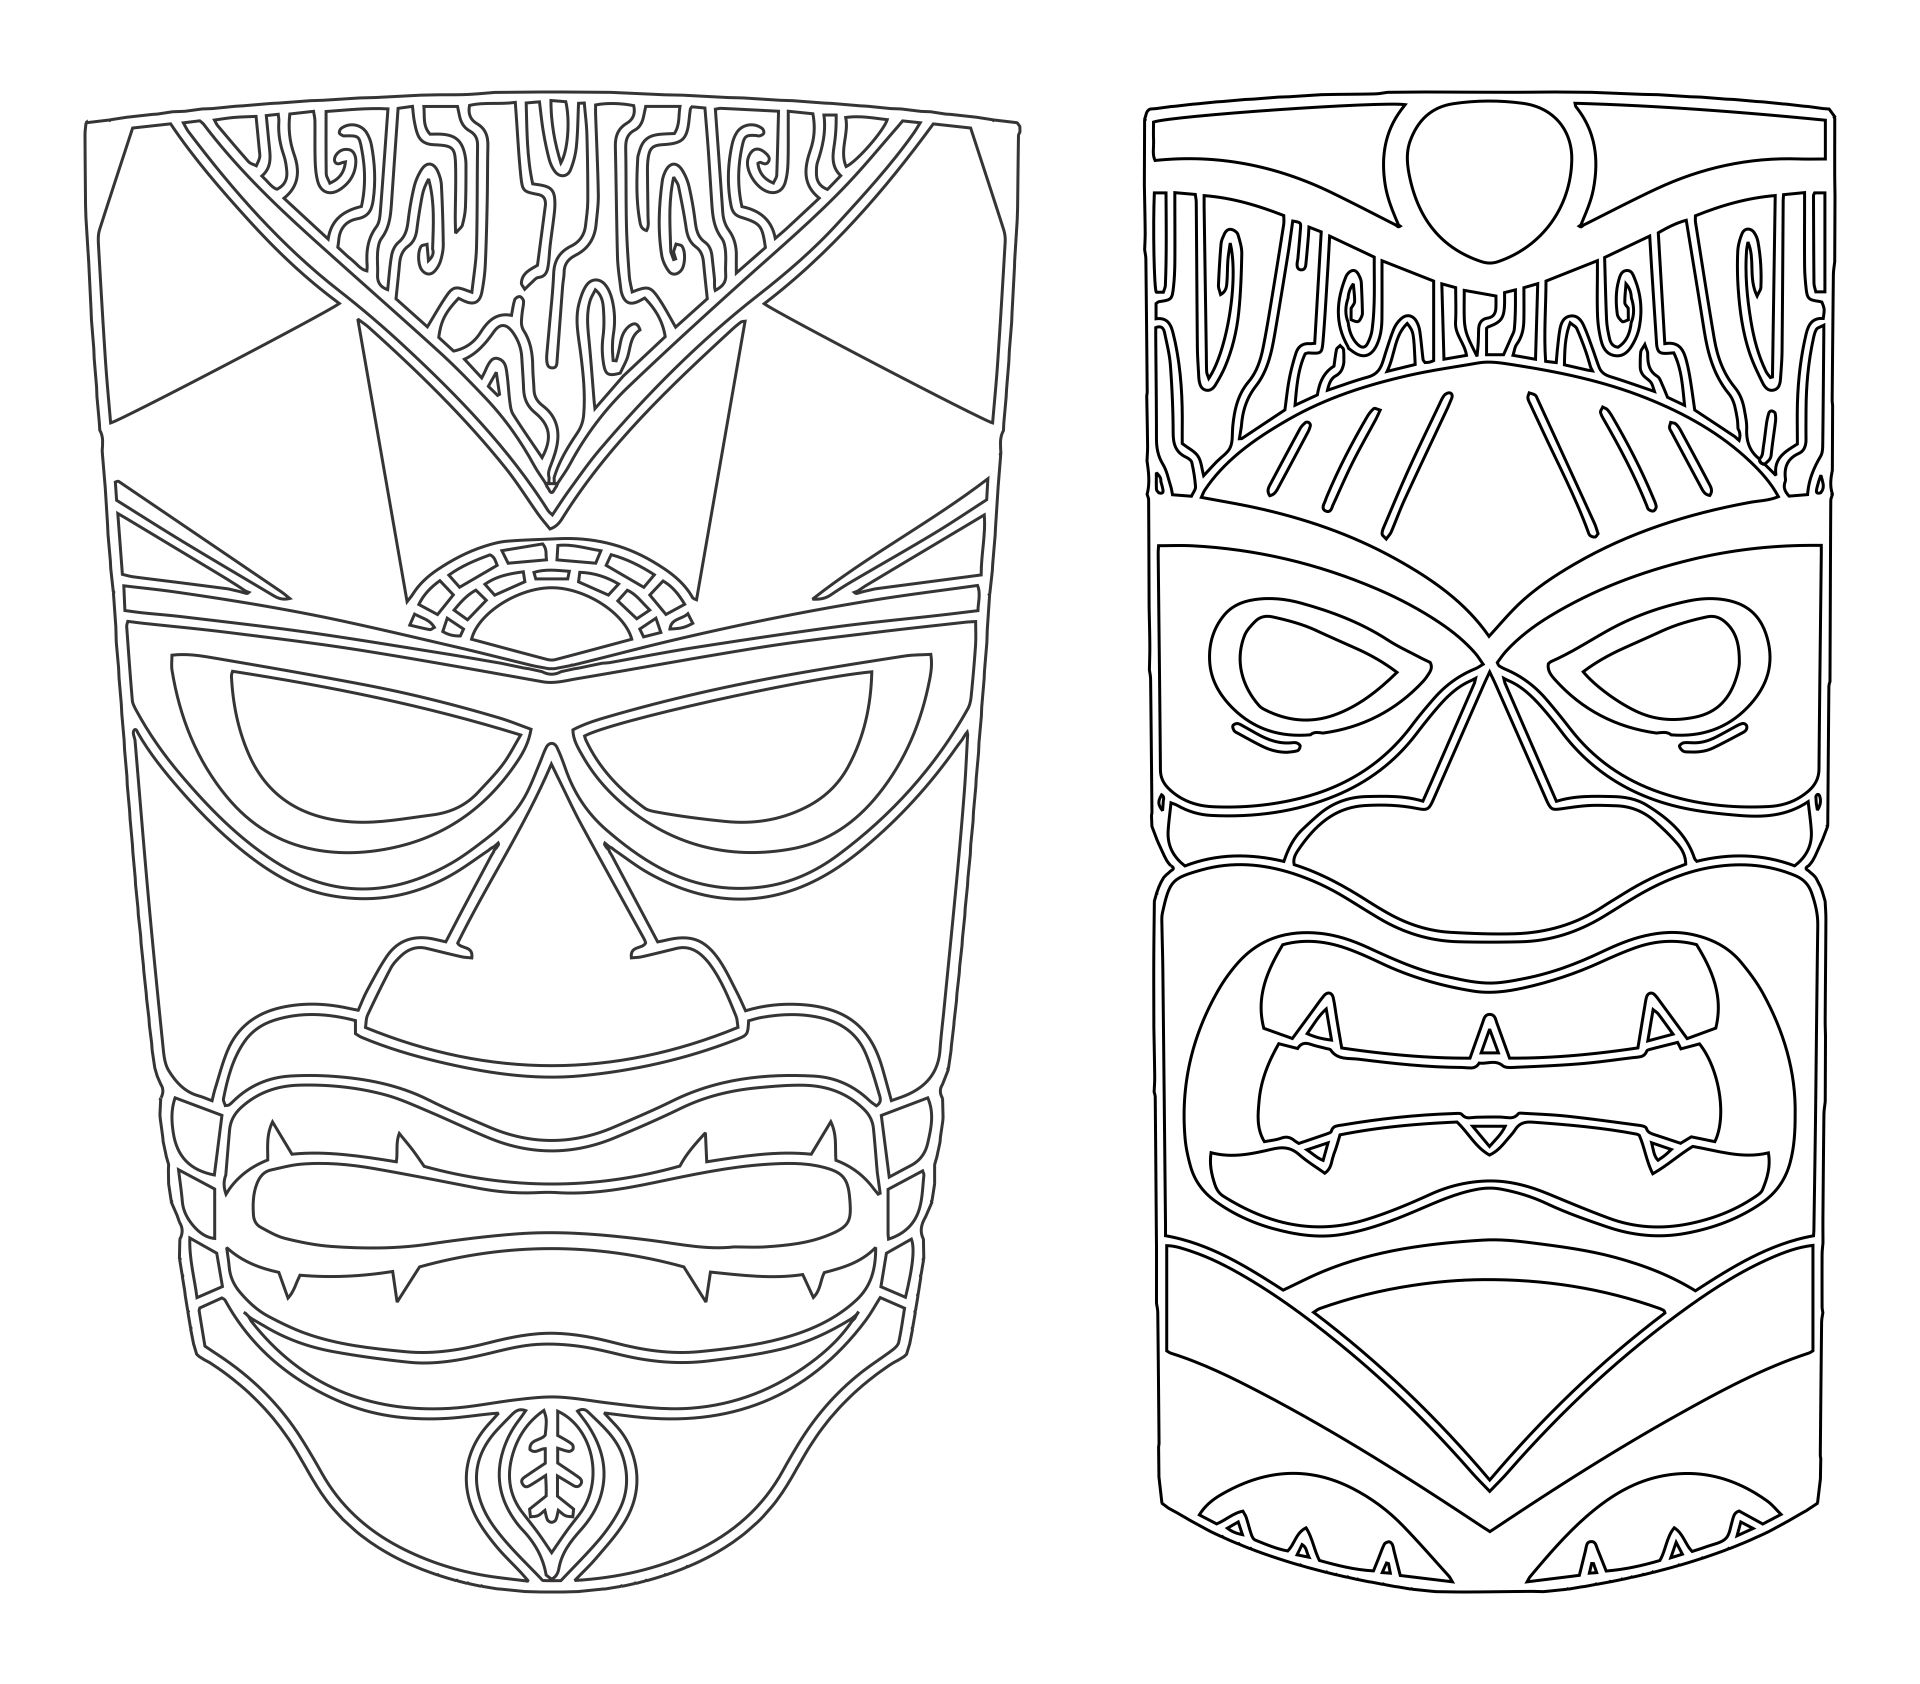 10 Best Printable Totem Pole Templates PDF for Free at Printablee